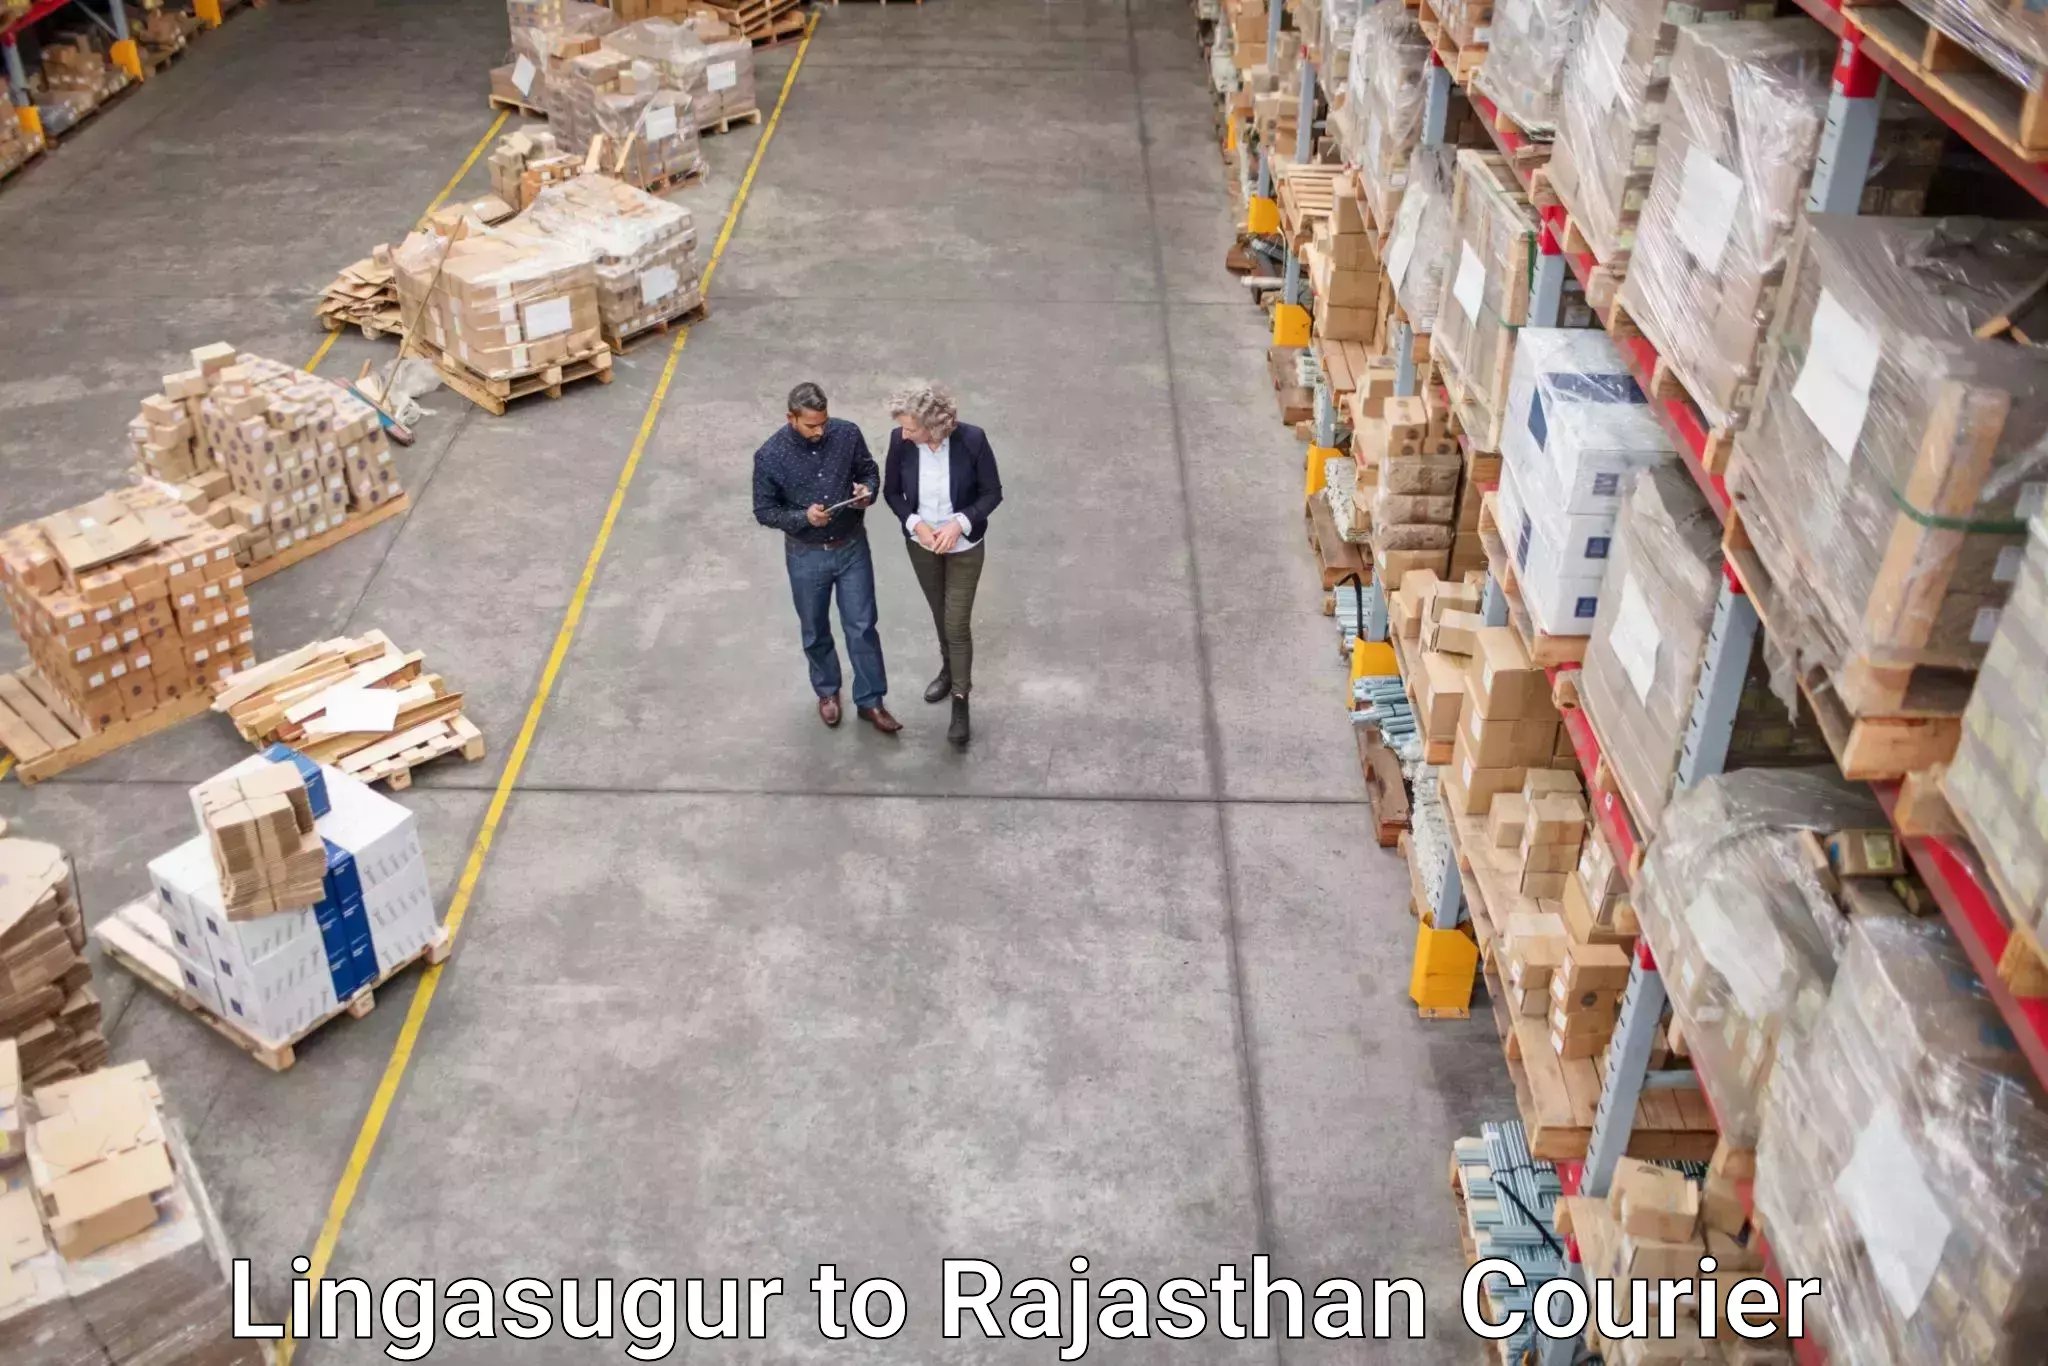 Global courier networks Lingasugur to Sikar